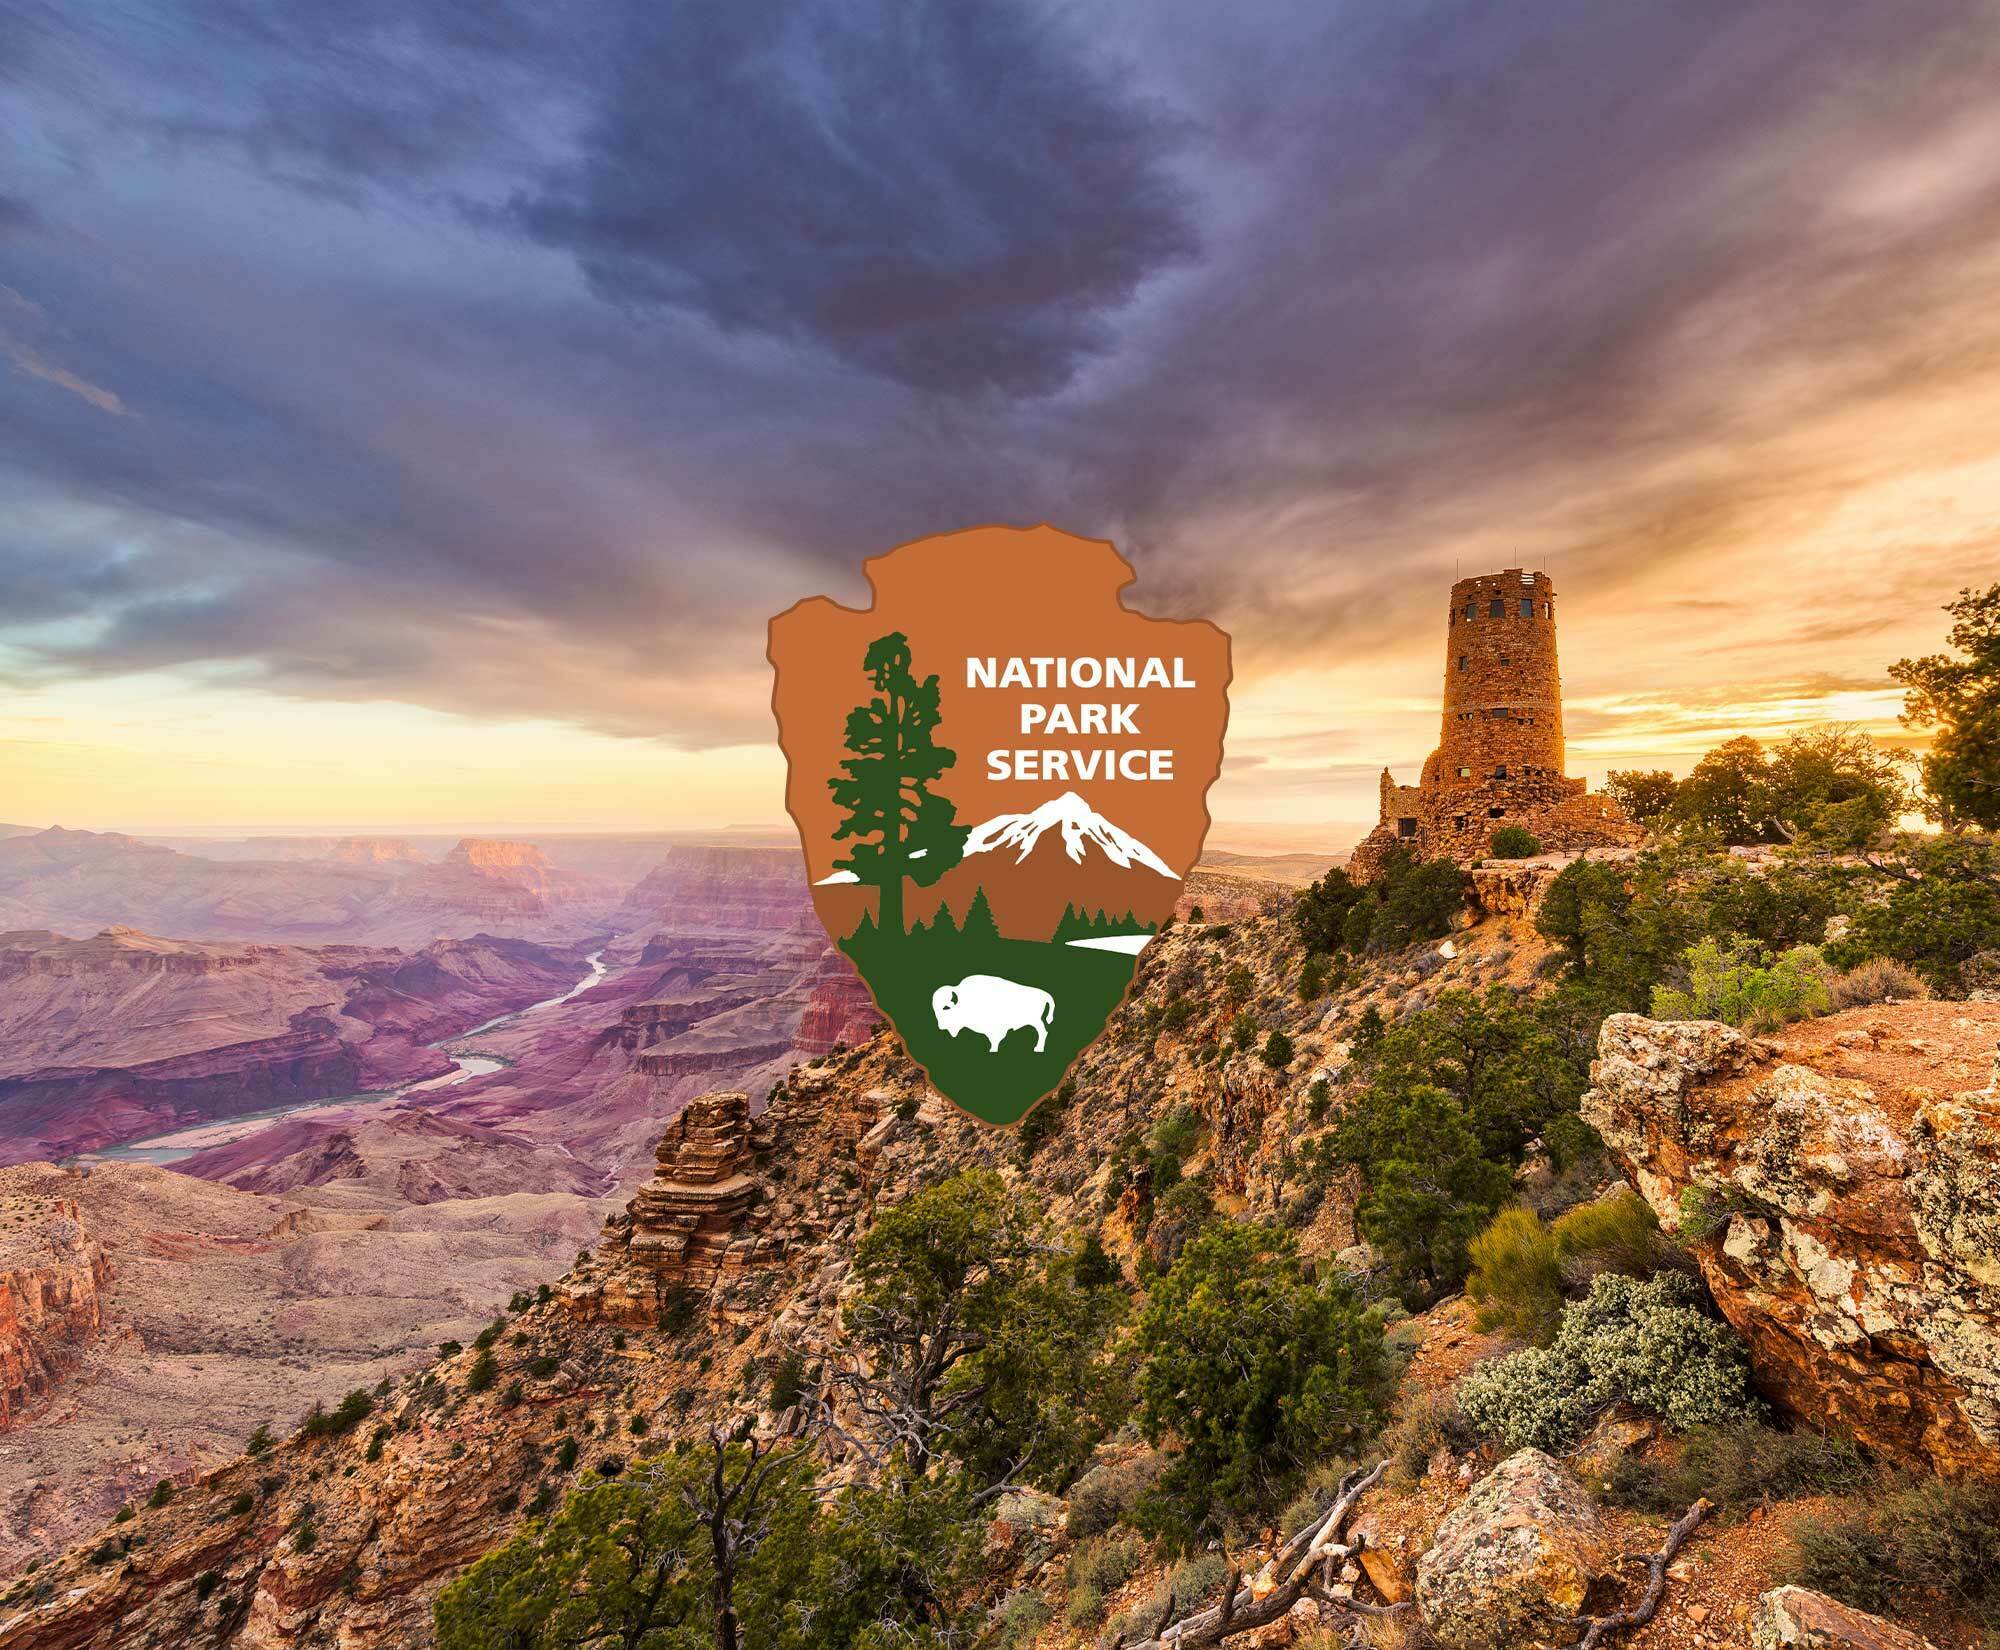 National Park Service Arrowhead Logo with Grand Canyon Scenic Imagery